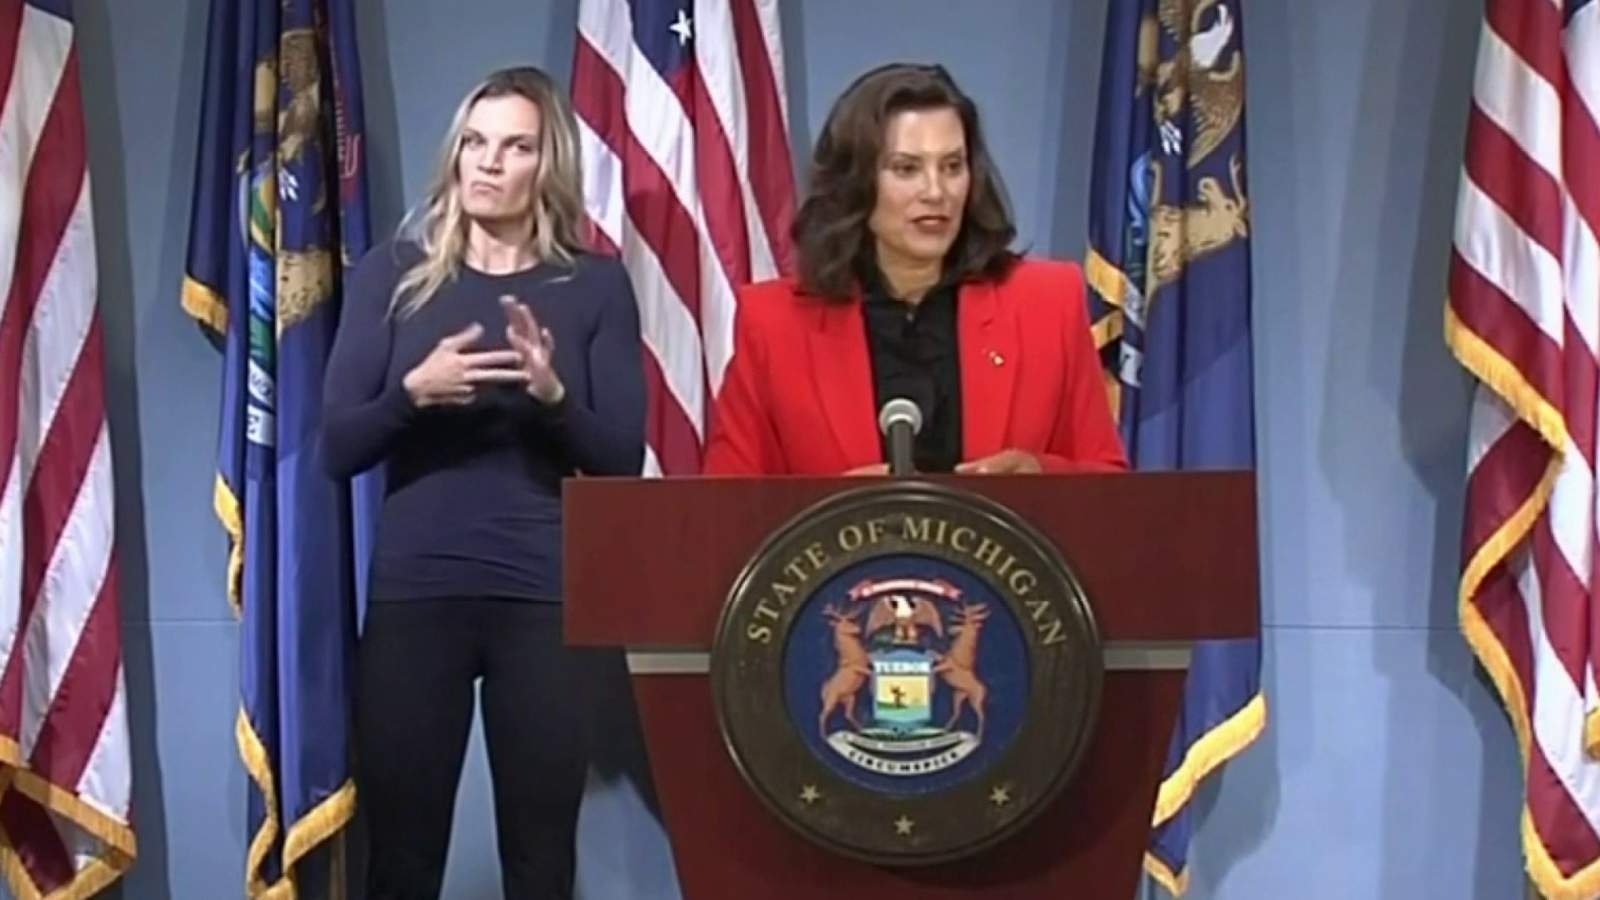 Gov. Whitmer: Today’s actions affect decision on in-person learning in coming weeks